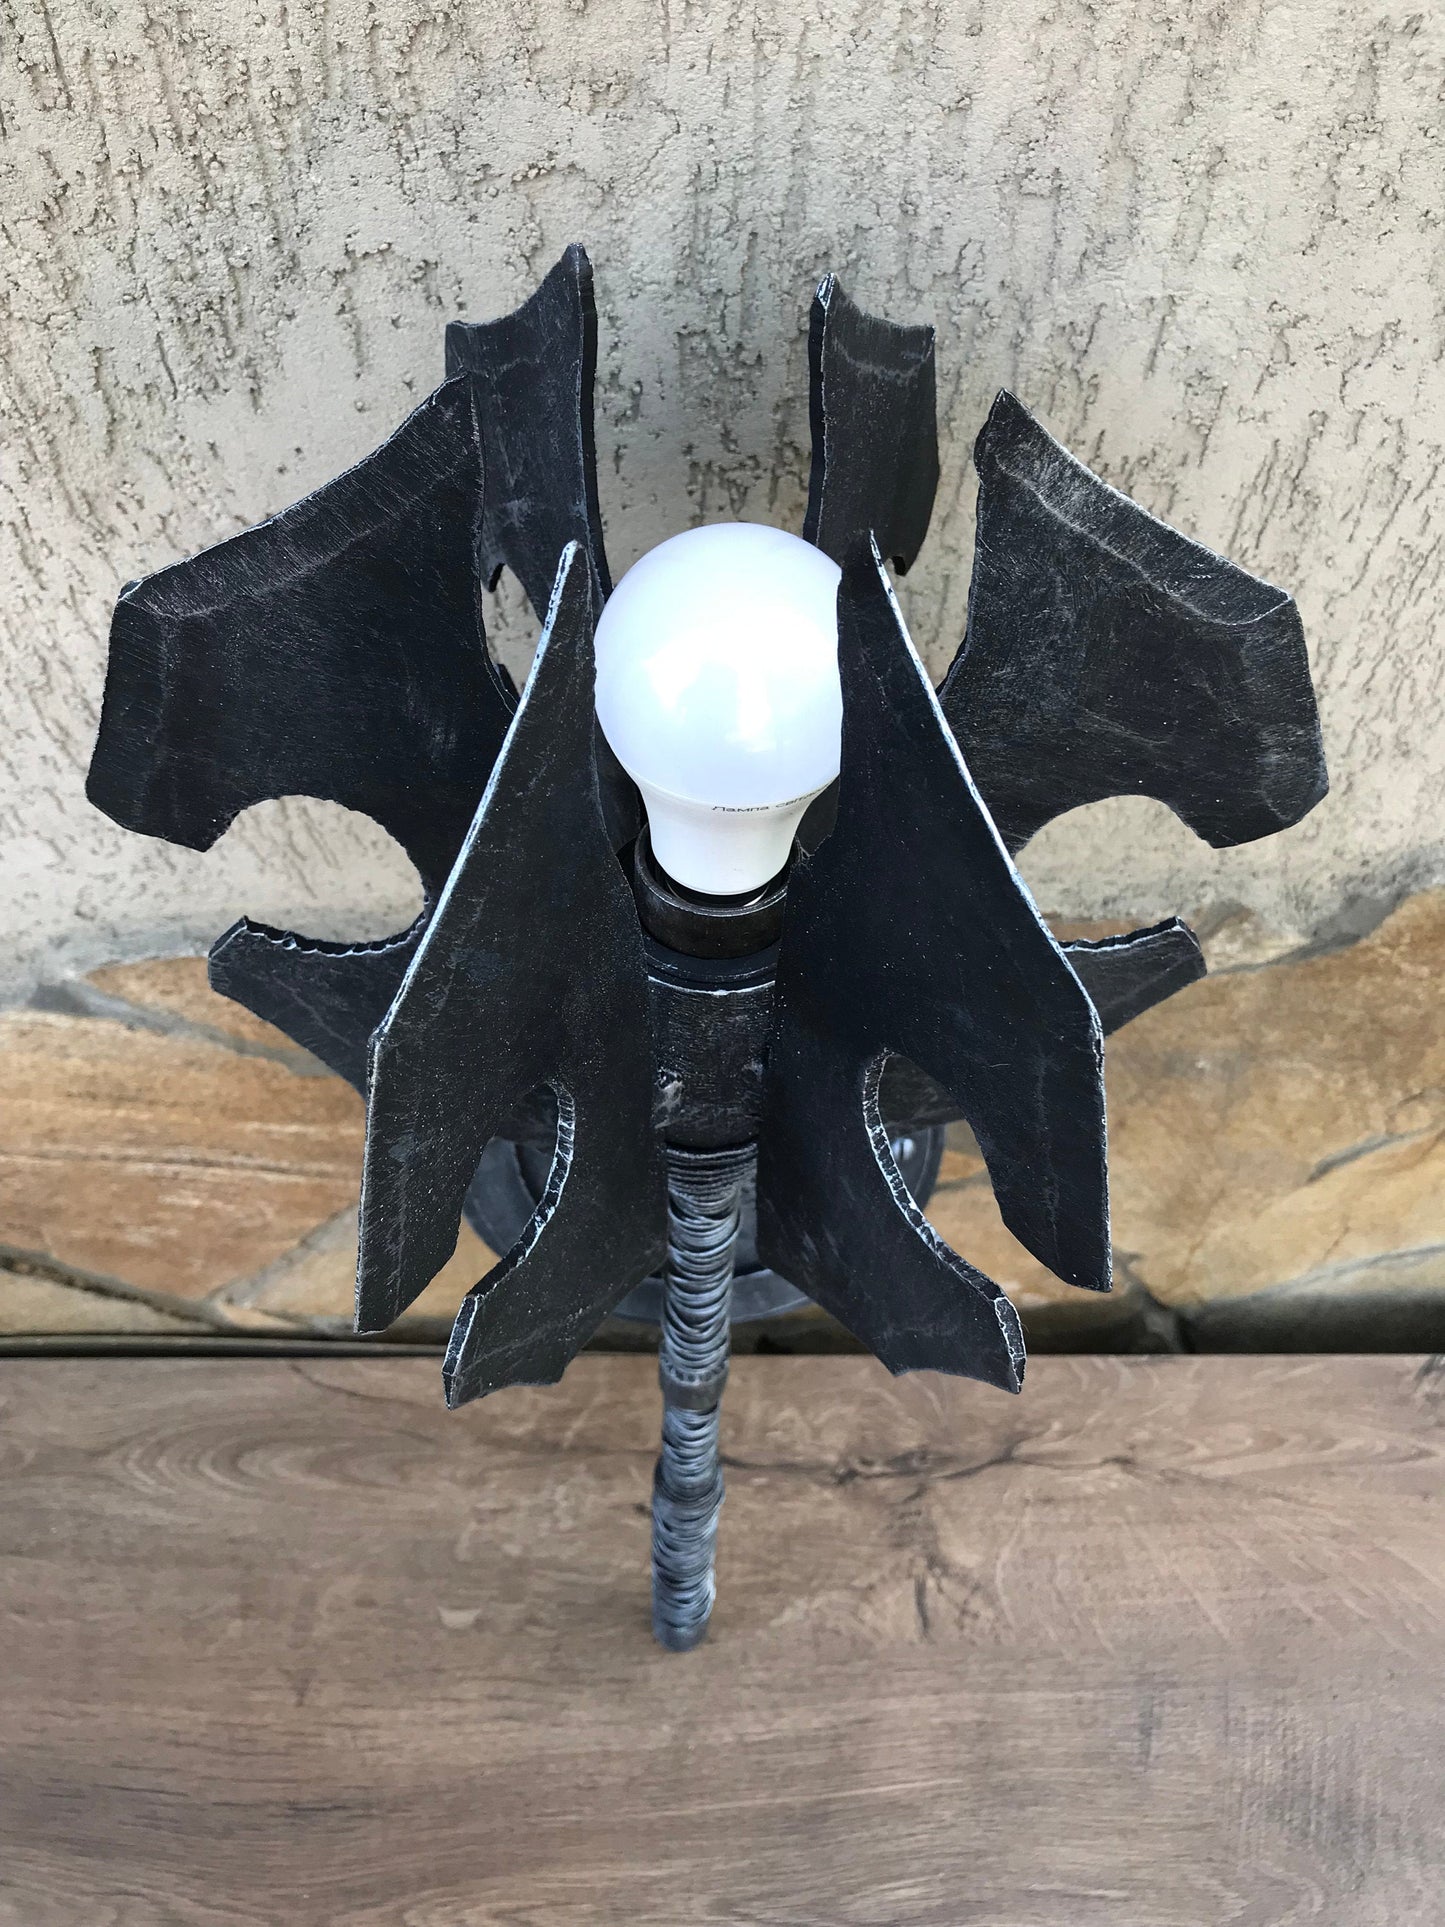 Wall sconce, Azogs mace, sconce light, wall lamp, mace, war mace, hand forged mace, flail, sconce, castle decor, medieval